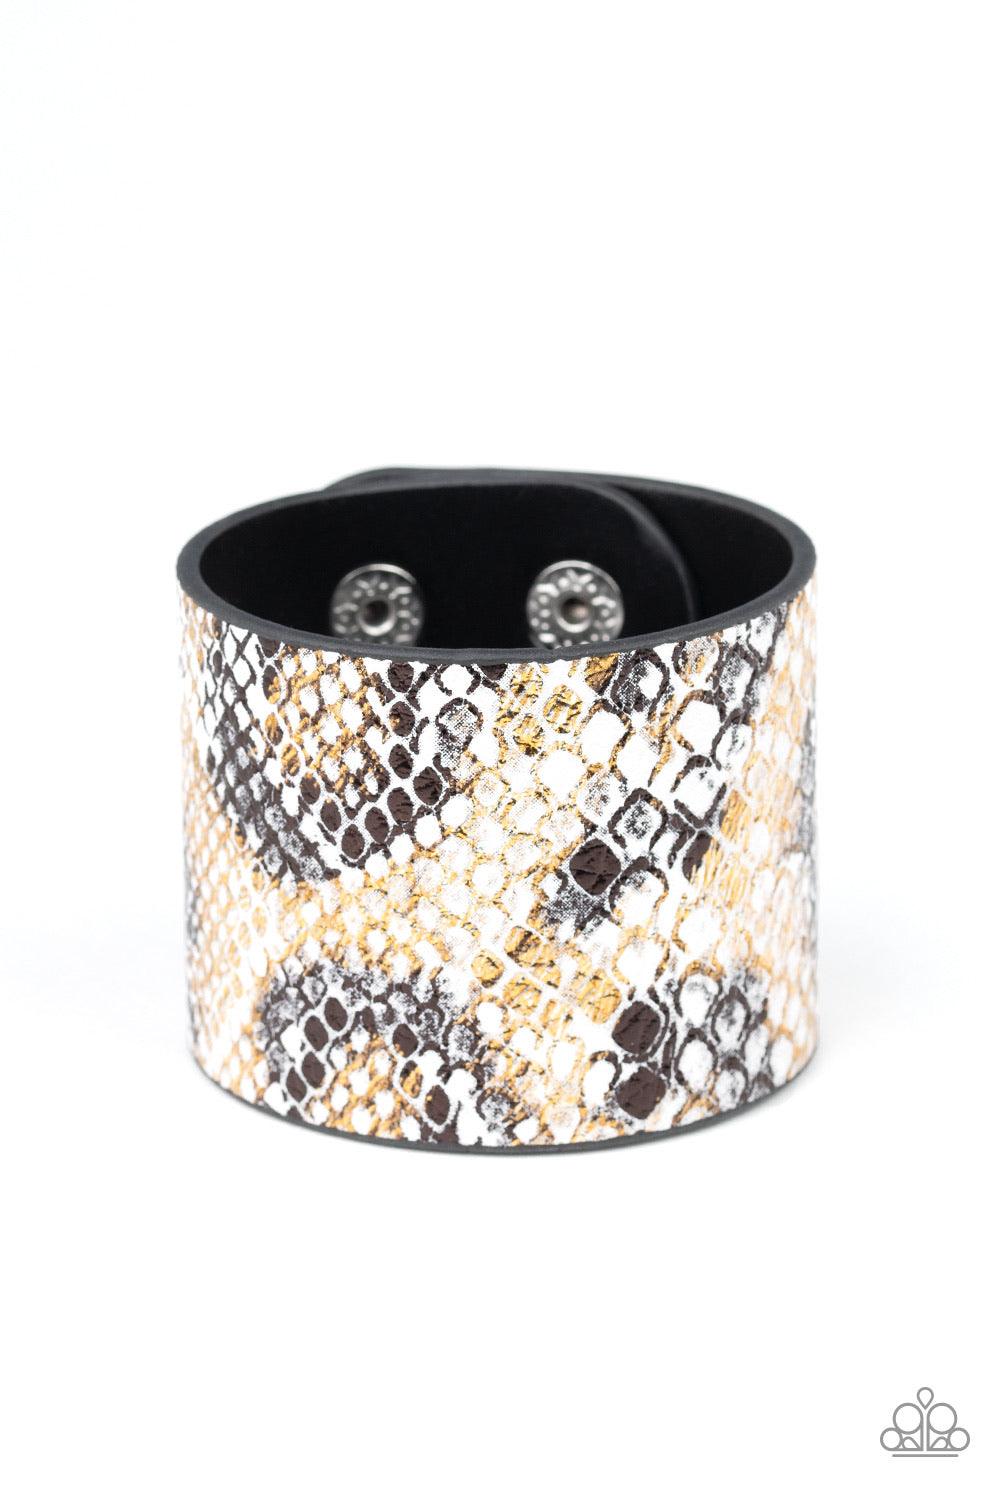 Paparazzi Accessories Serpent Shimmer - Multi Featuring a shiny gold and black python print, a thick white leather band wraps around the wrist for a wild shimmer. Features an adjustable snap closure. Sold as one individual bracelet. Jewelry